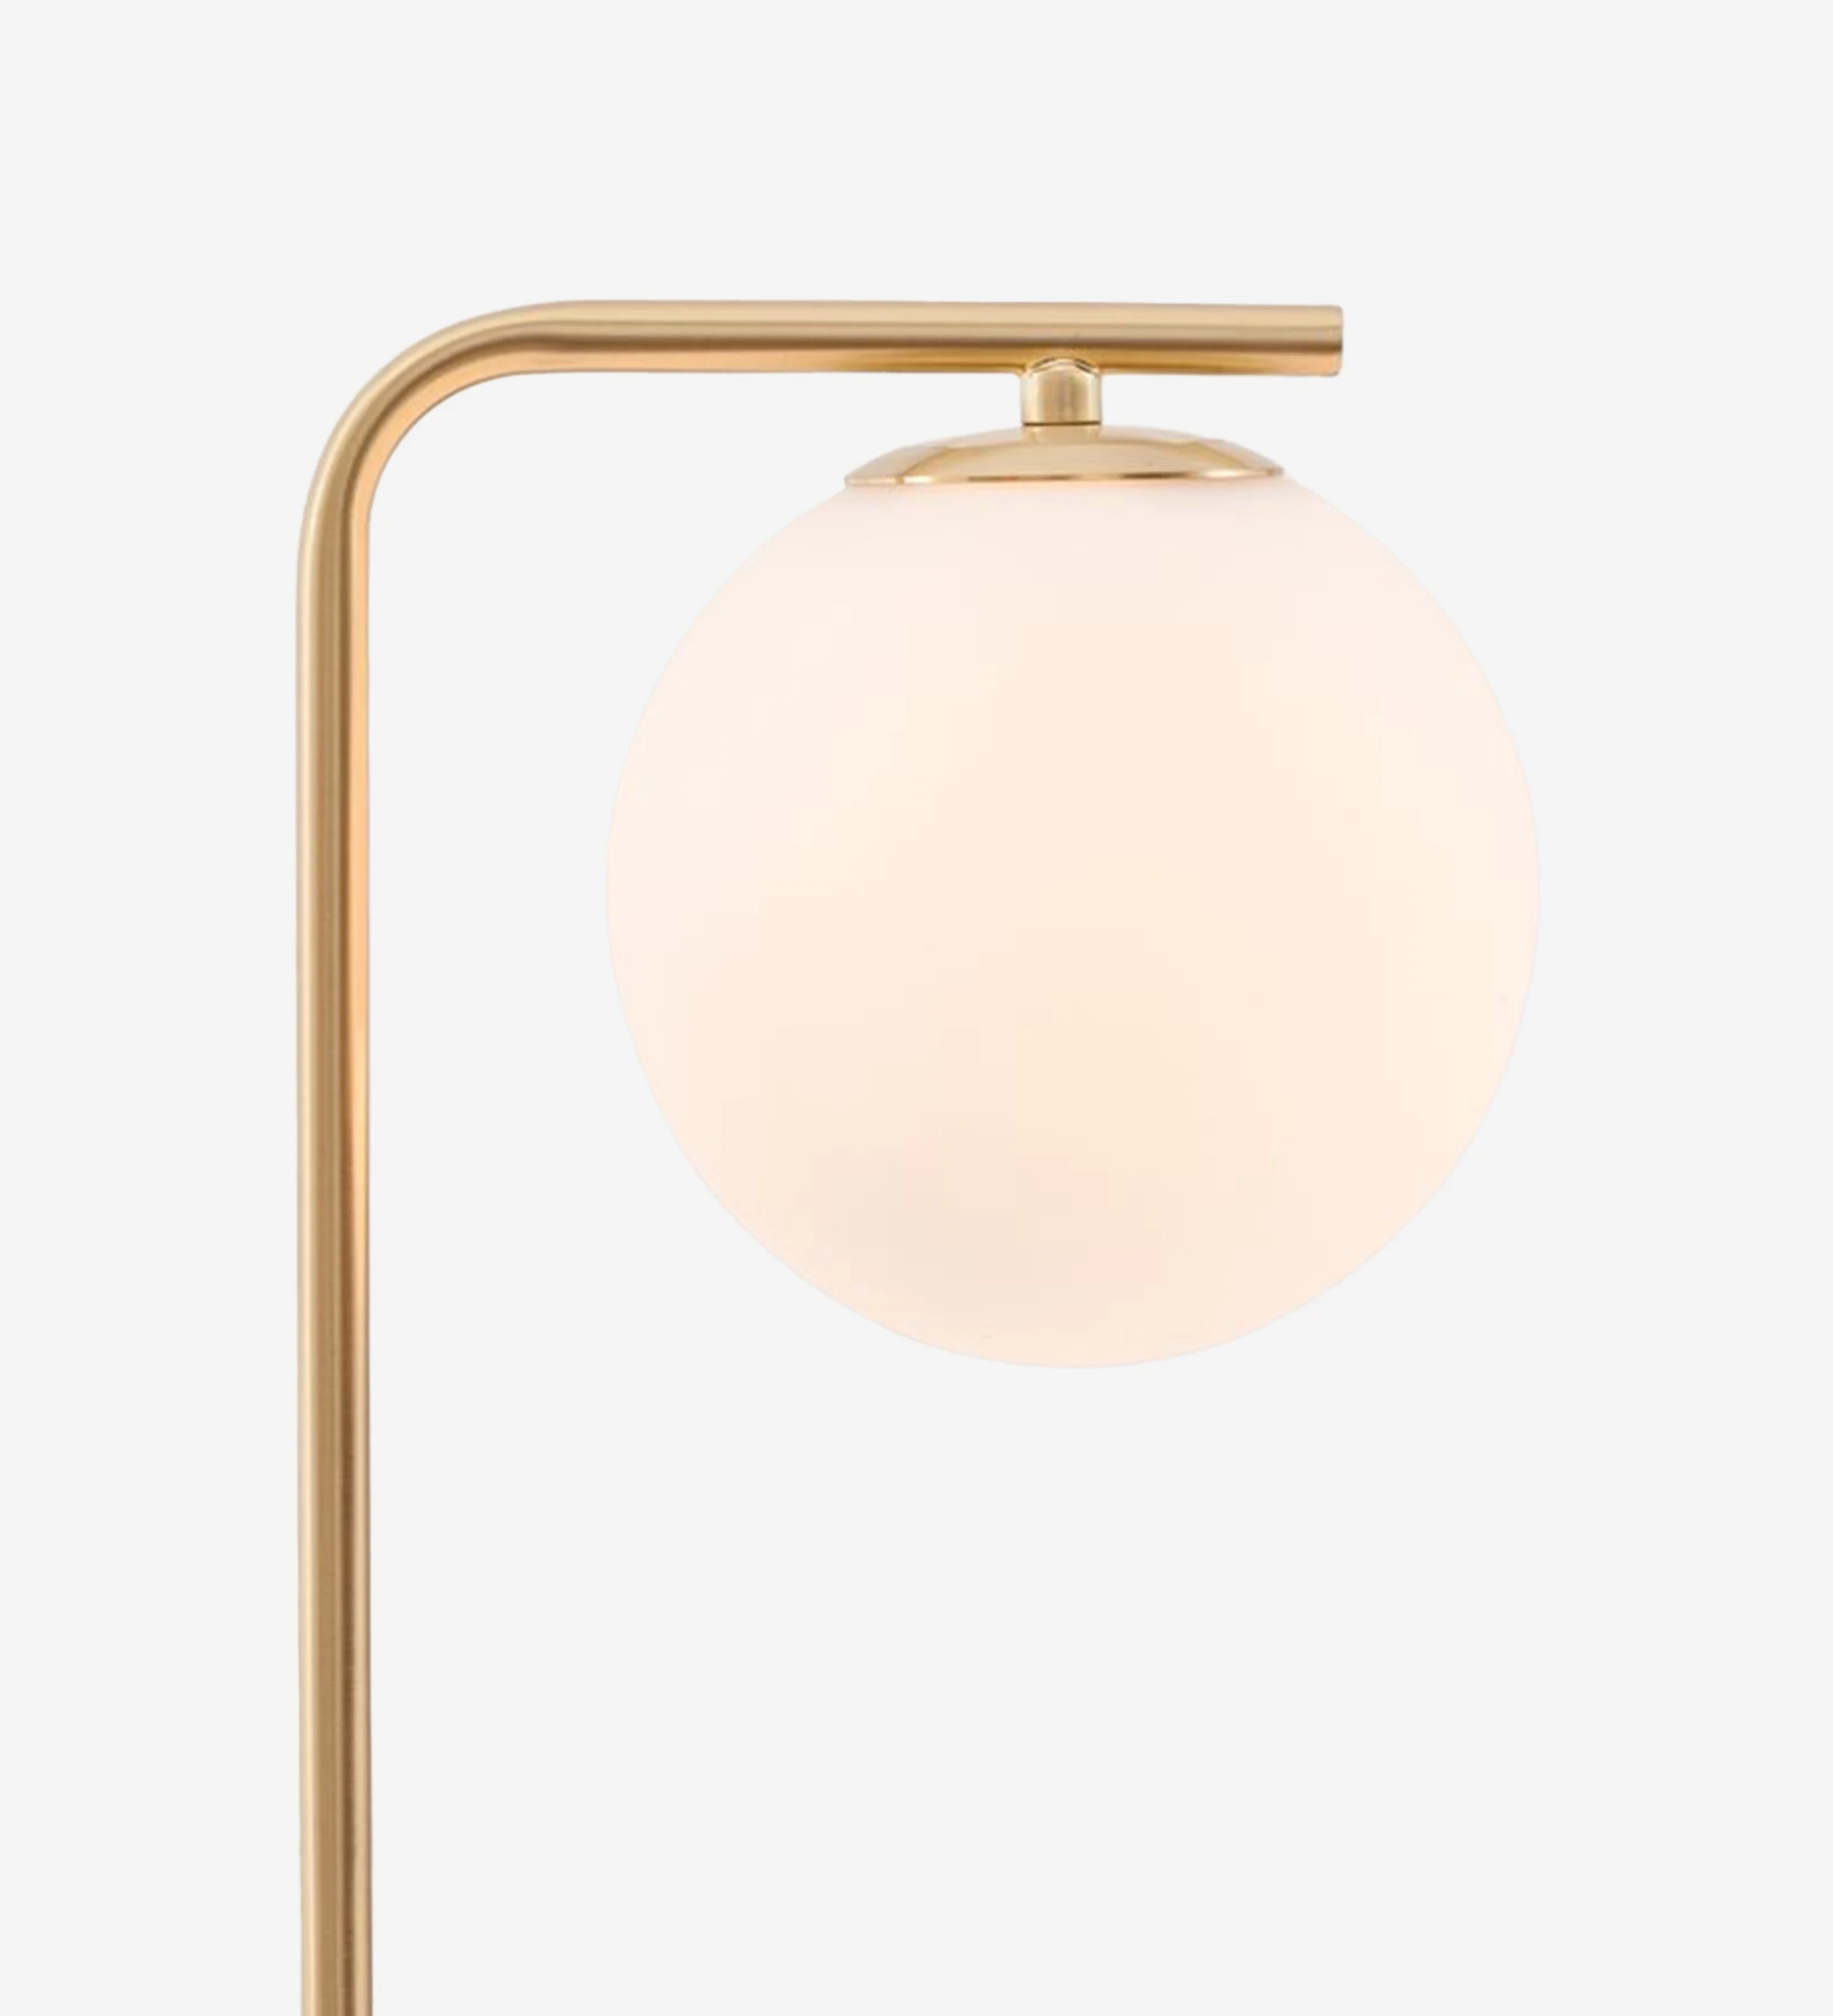  Table lamp with black marble base, golden metal structure and opal glass diffuser.